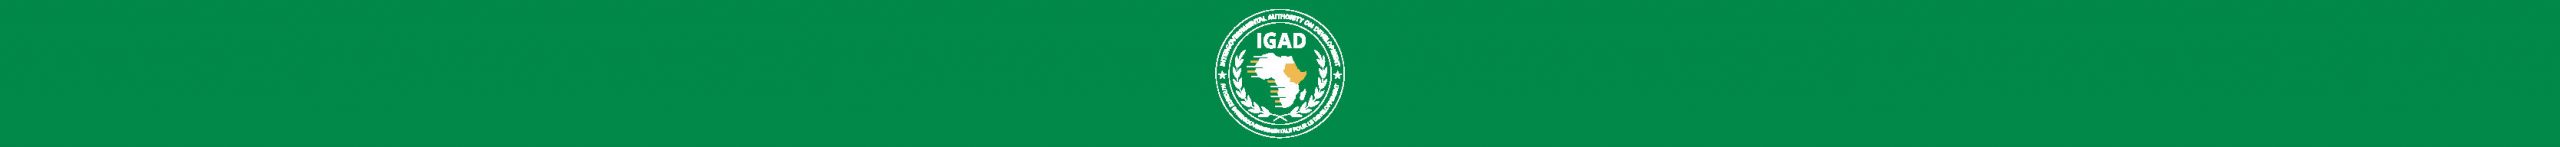 IGAD /ICPALD Conducted the 3rd Regional Fodder and Range Platform in IGAD Member States to Enhance Feed Security